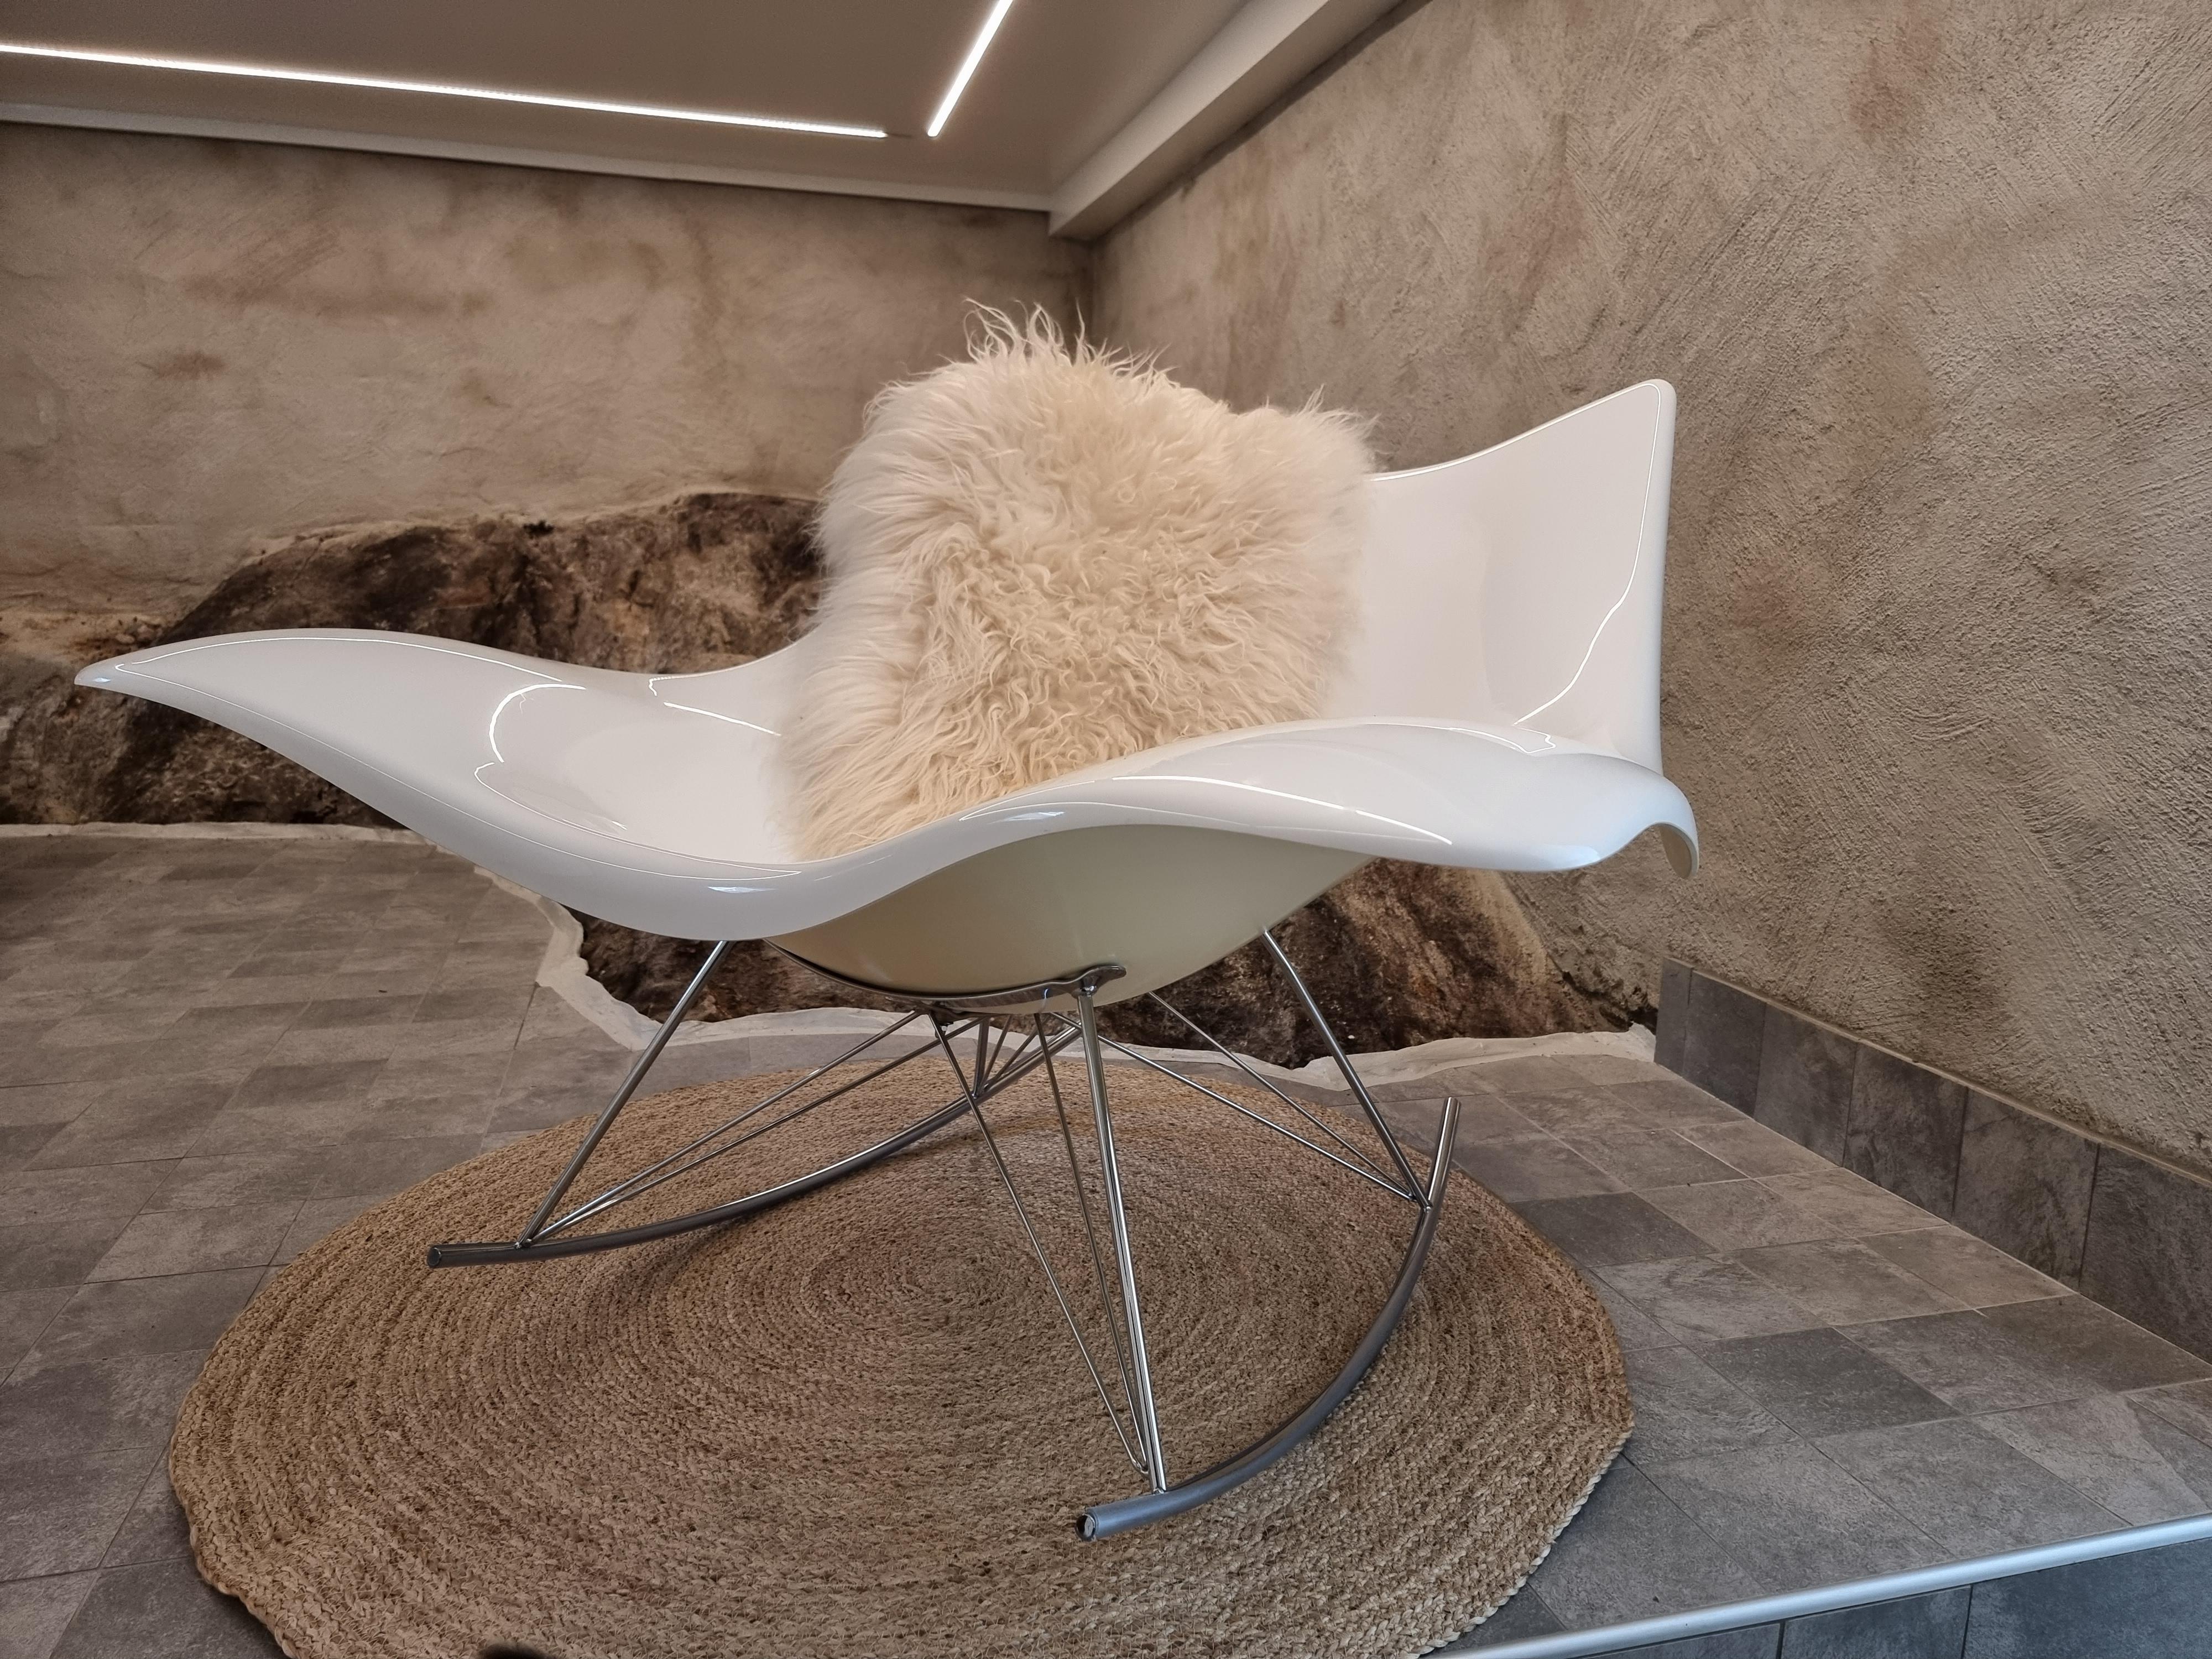 The iconic Stingray rocking chair was designed by Thomas Pedersen in 2002. Manifactured by Fredericia Furniture, Denmark. In its most classic simplicity, white plastic with stainless steel frame. 

In good condition, few signs of age and wear.